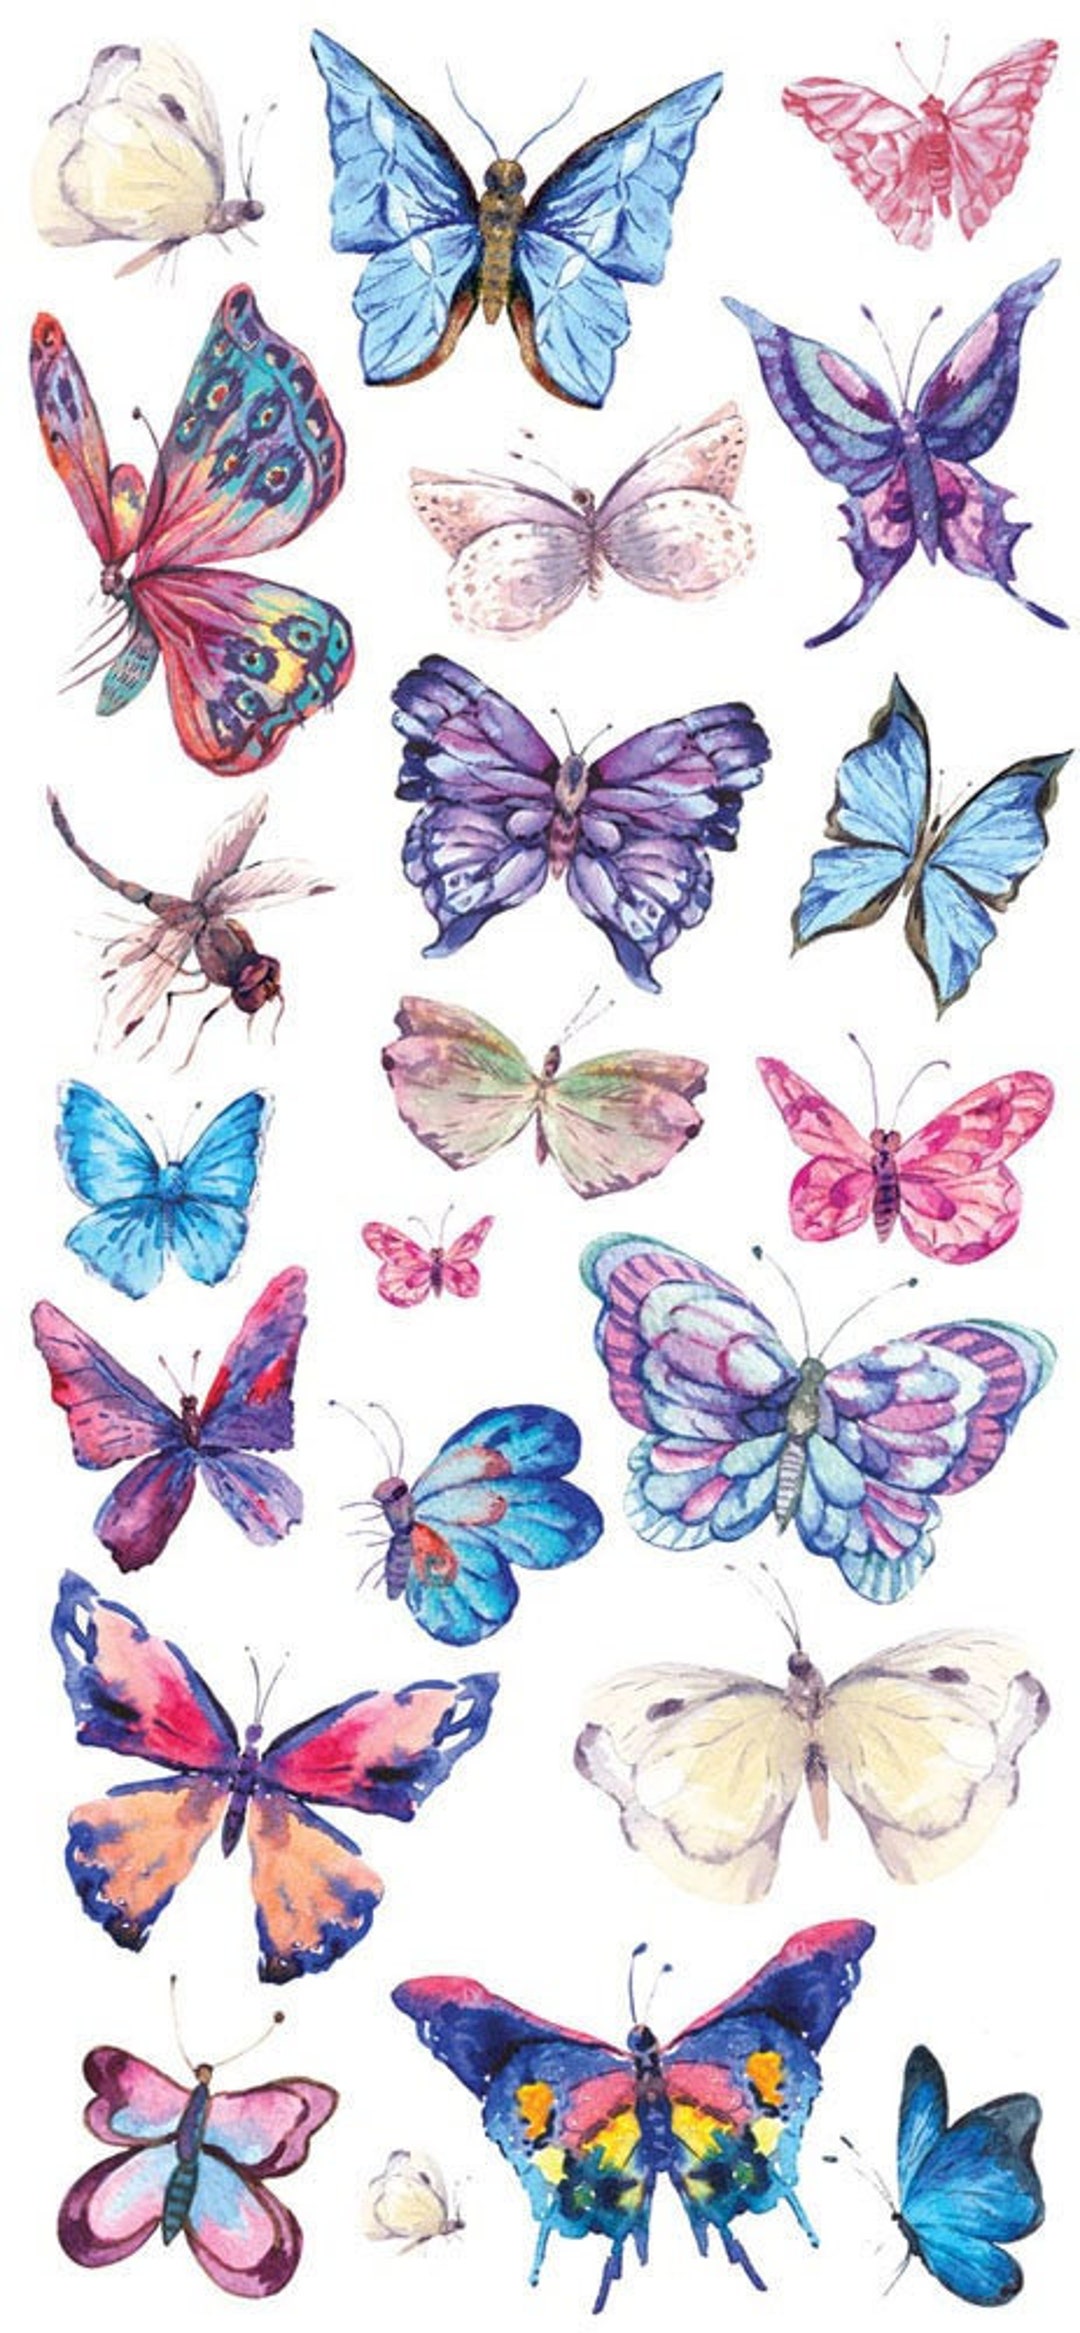 3 Sheets Self Adhesive Butterfly Stickers Colorful Scrapbooking Stickers  Each Sheet 3-3/4 by 7-7/8 STKC107 